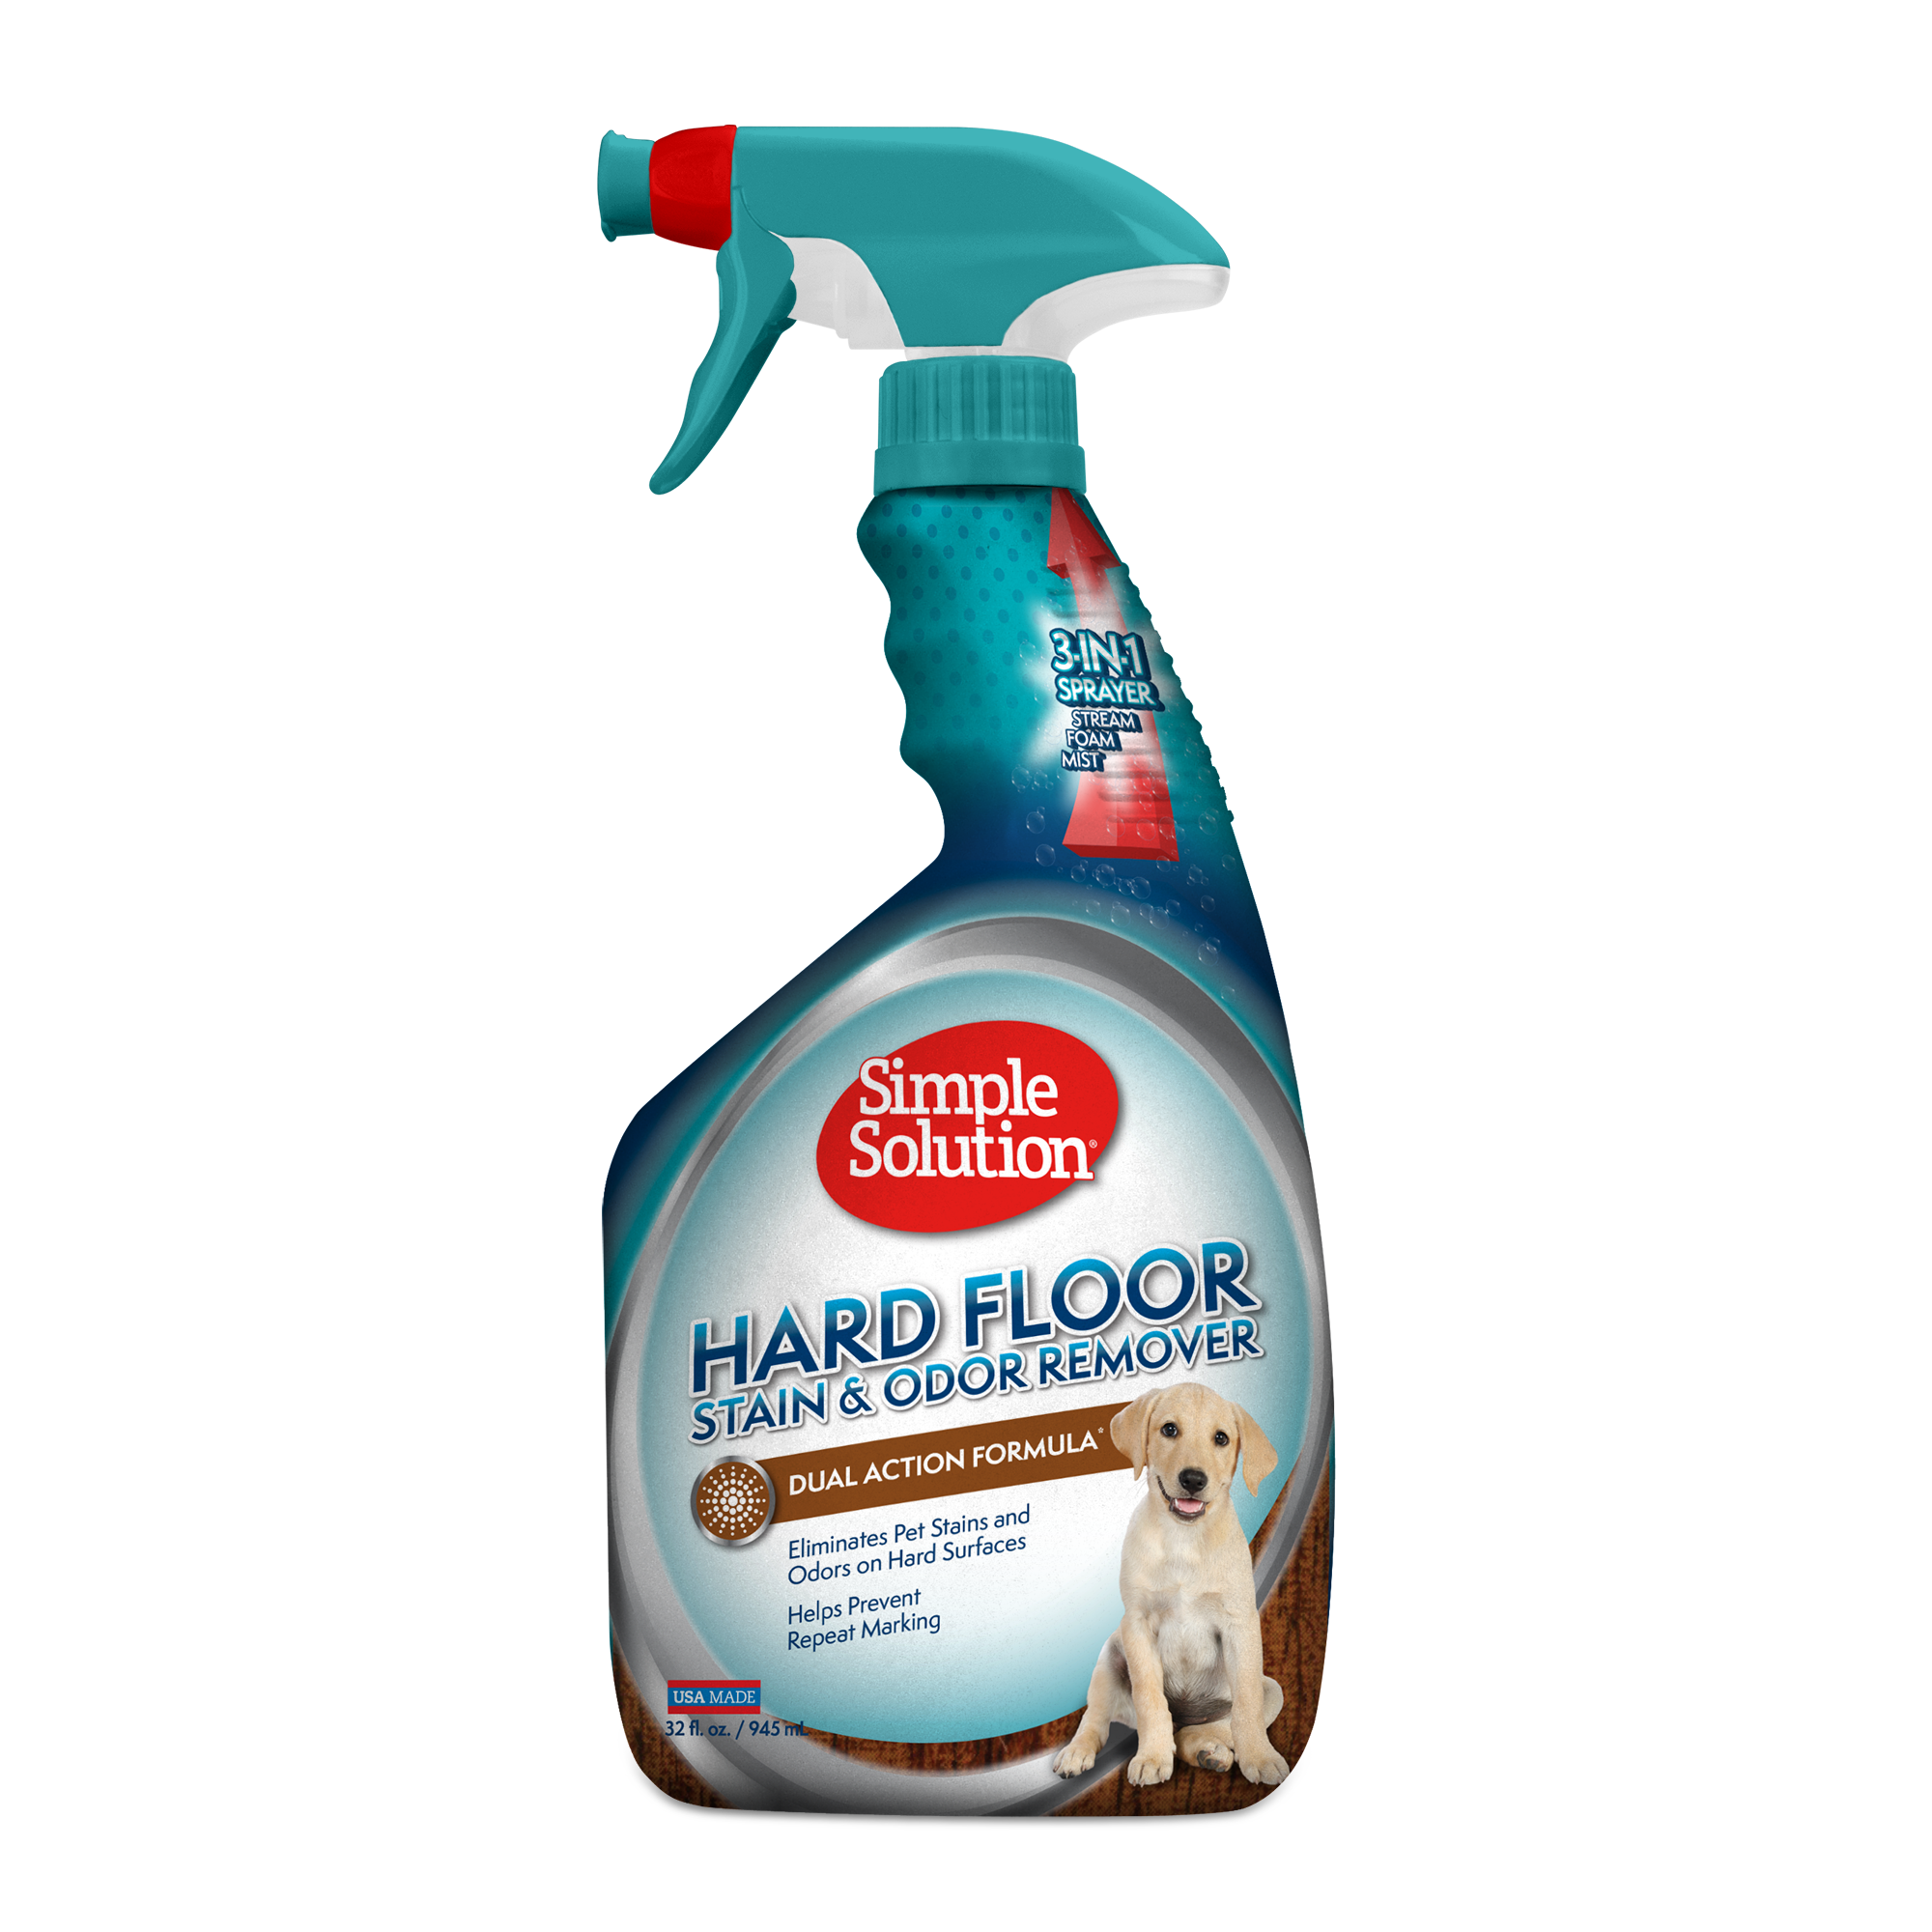 Hard Floor Cleaning Hard Surfaces Just Got Easy